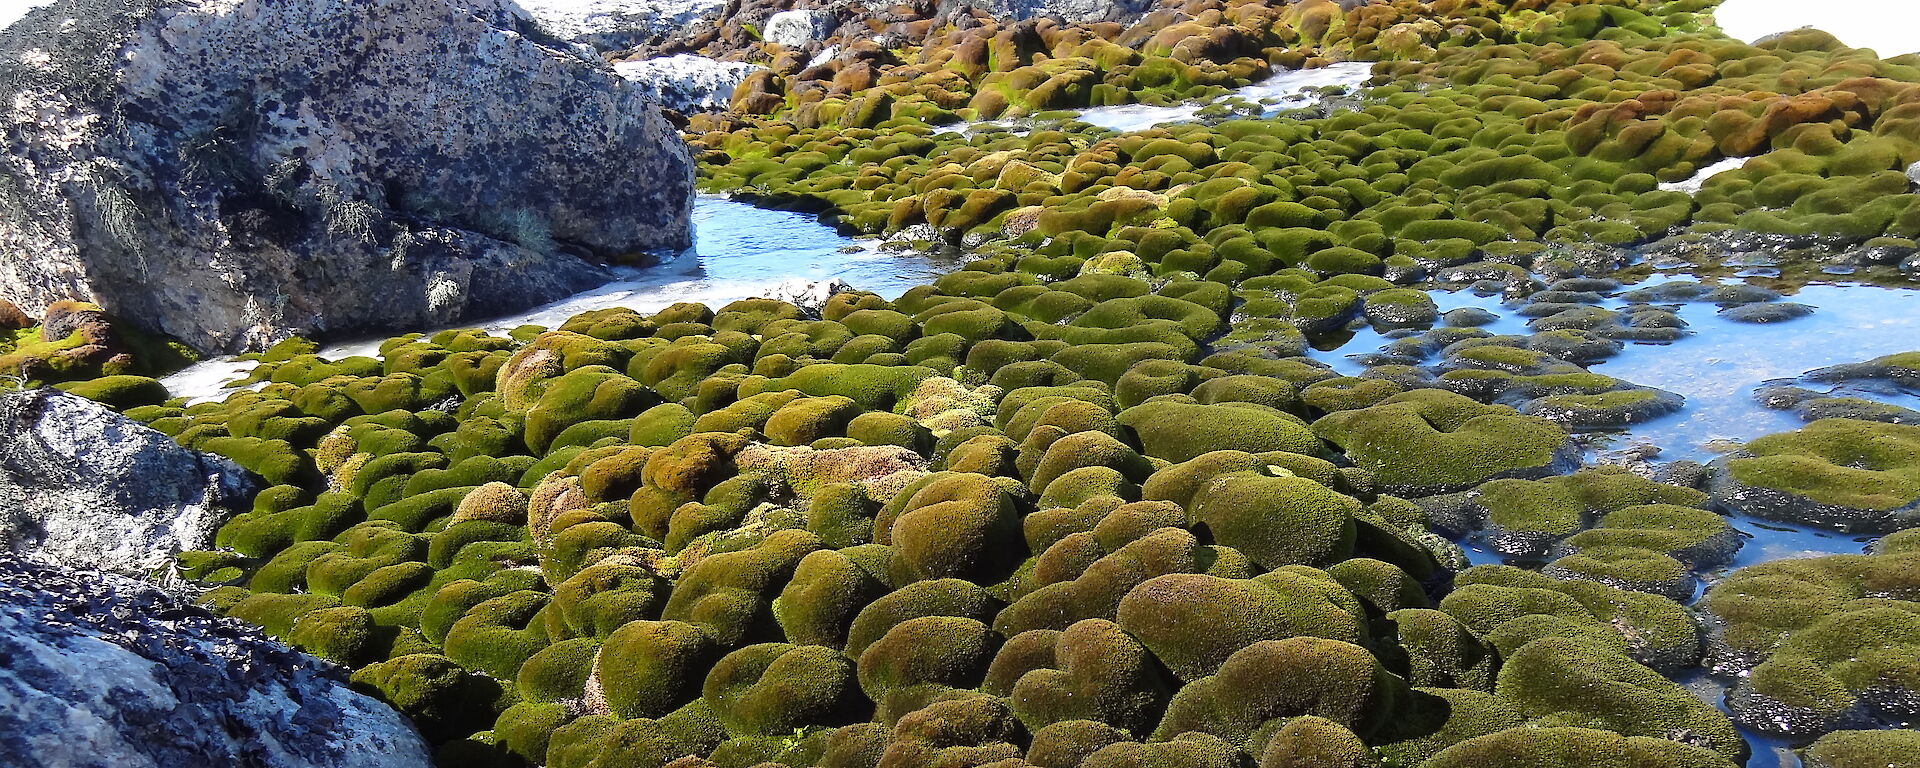 moss bed